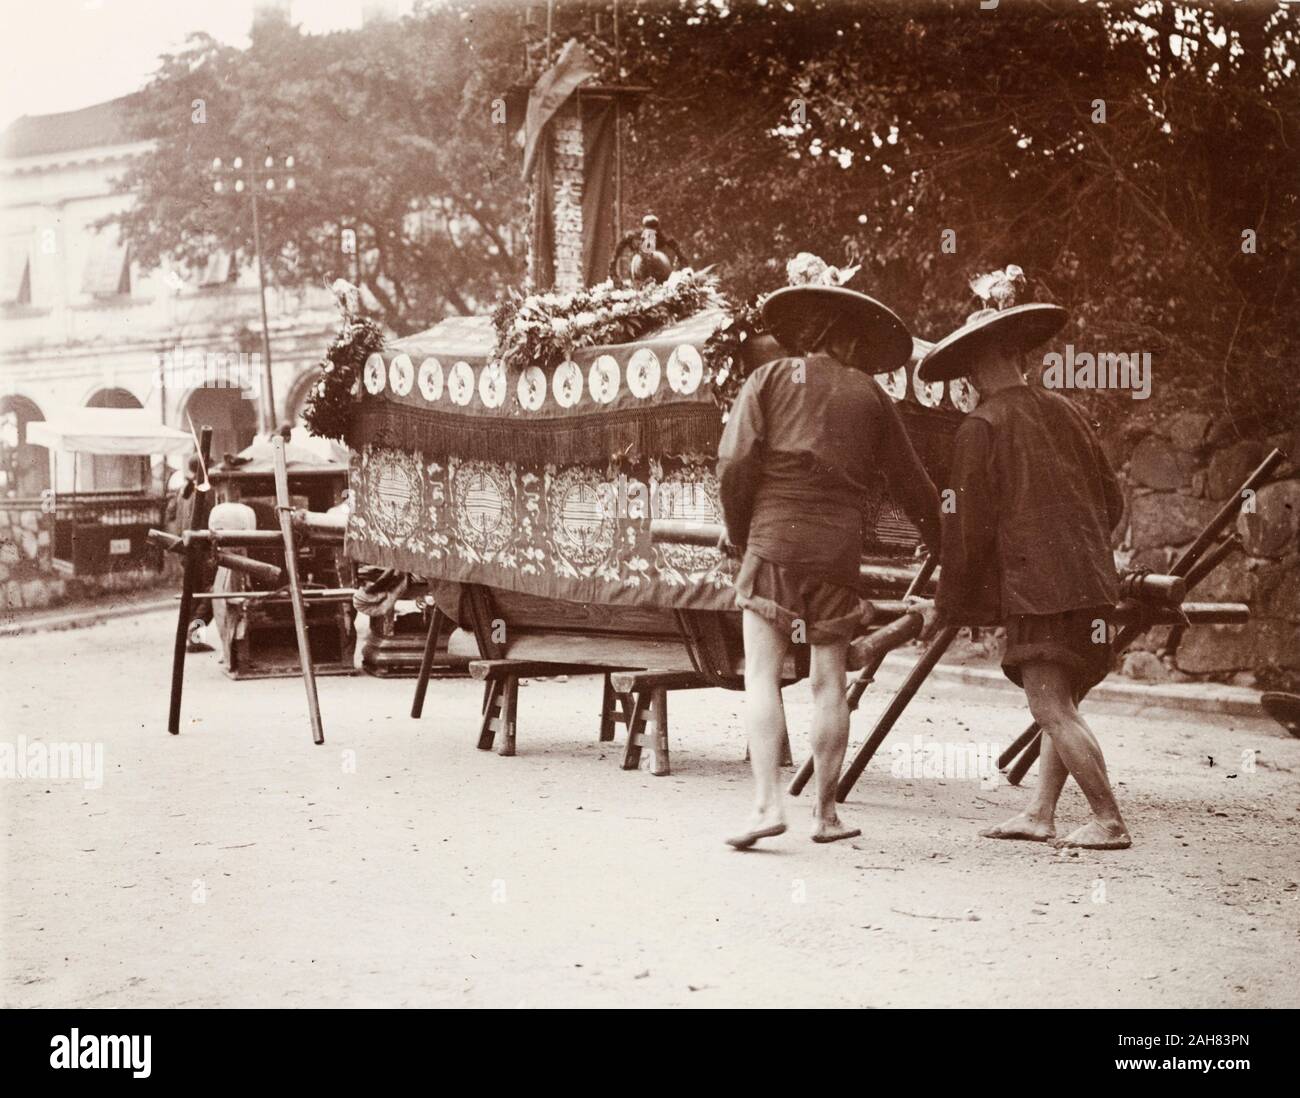 China, Two pallbearers prepare to carry a coffin on a wooden bier during a Chinese funeral ceremony. The coffin is draped in fine cloth and decorated with wreaths of flowers, indicating that the deceased had been wealthy.Original manuscript caption: Chinese funeral - (wealthy), circa 1905. 1998/028/1/1/52. Stock Photo